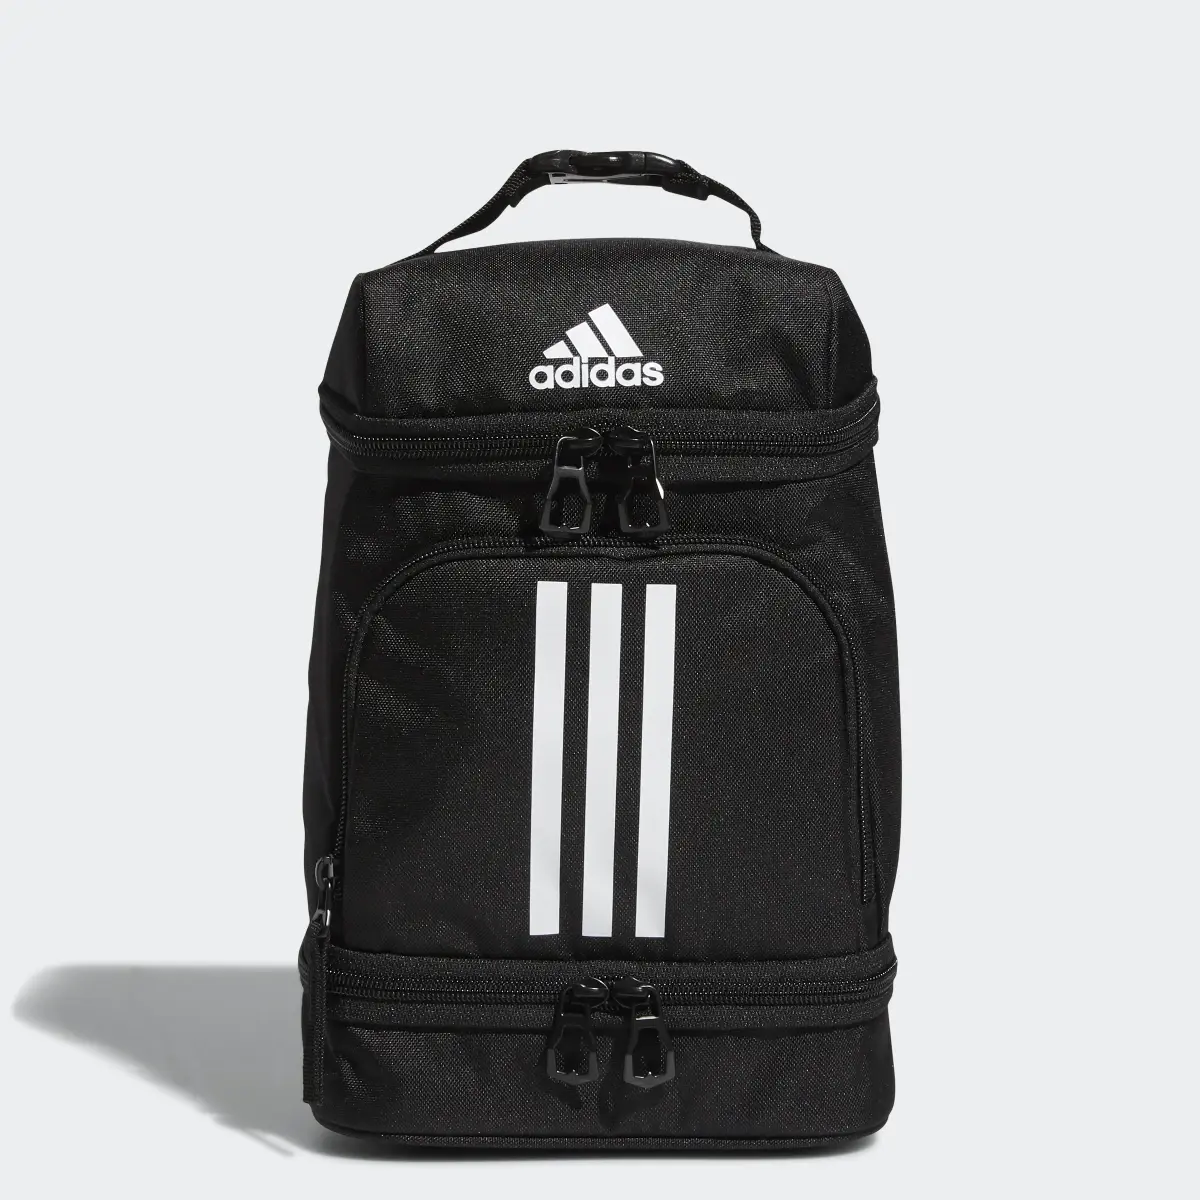 Adidas Excel Lunch Bag. 1